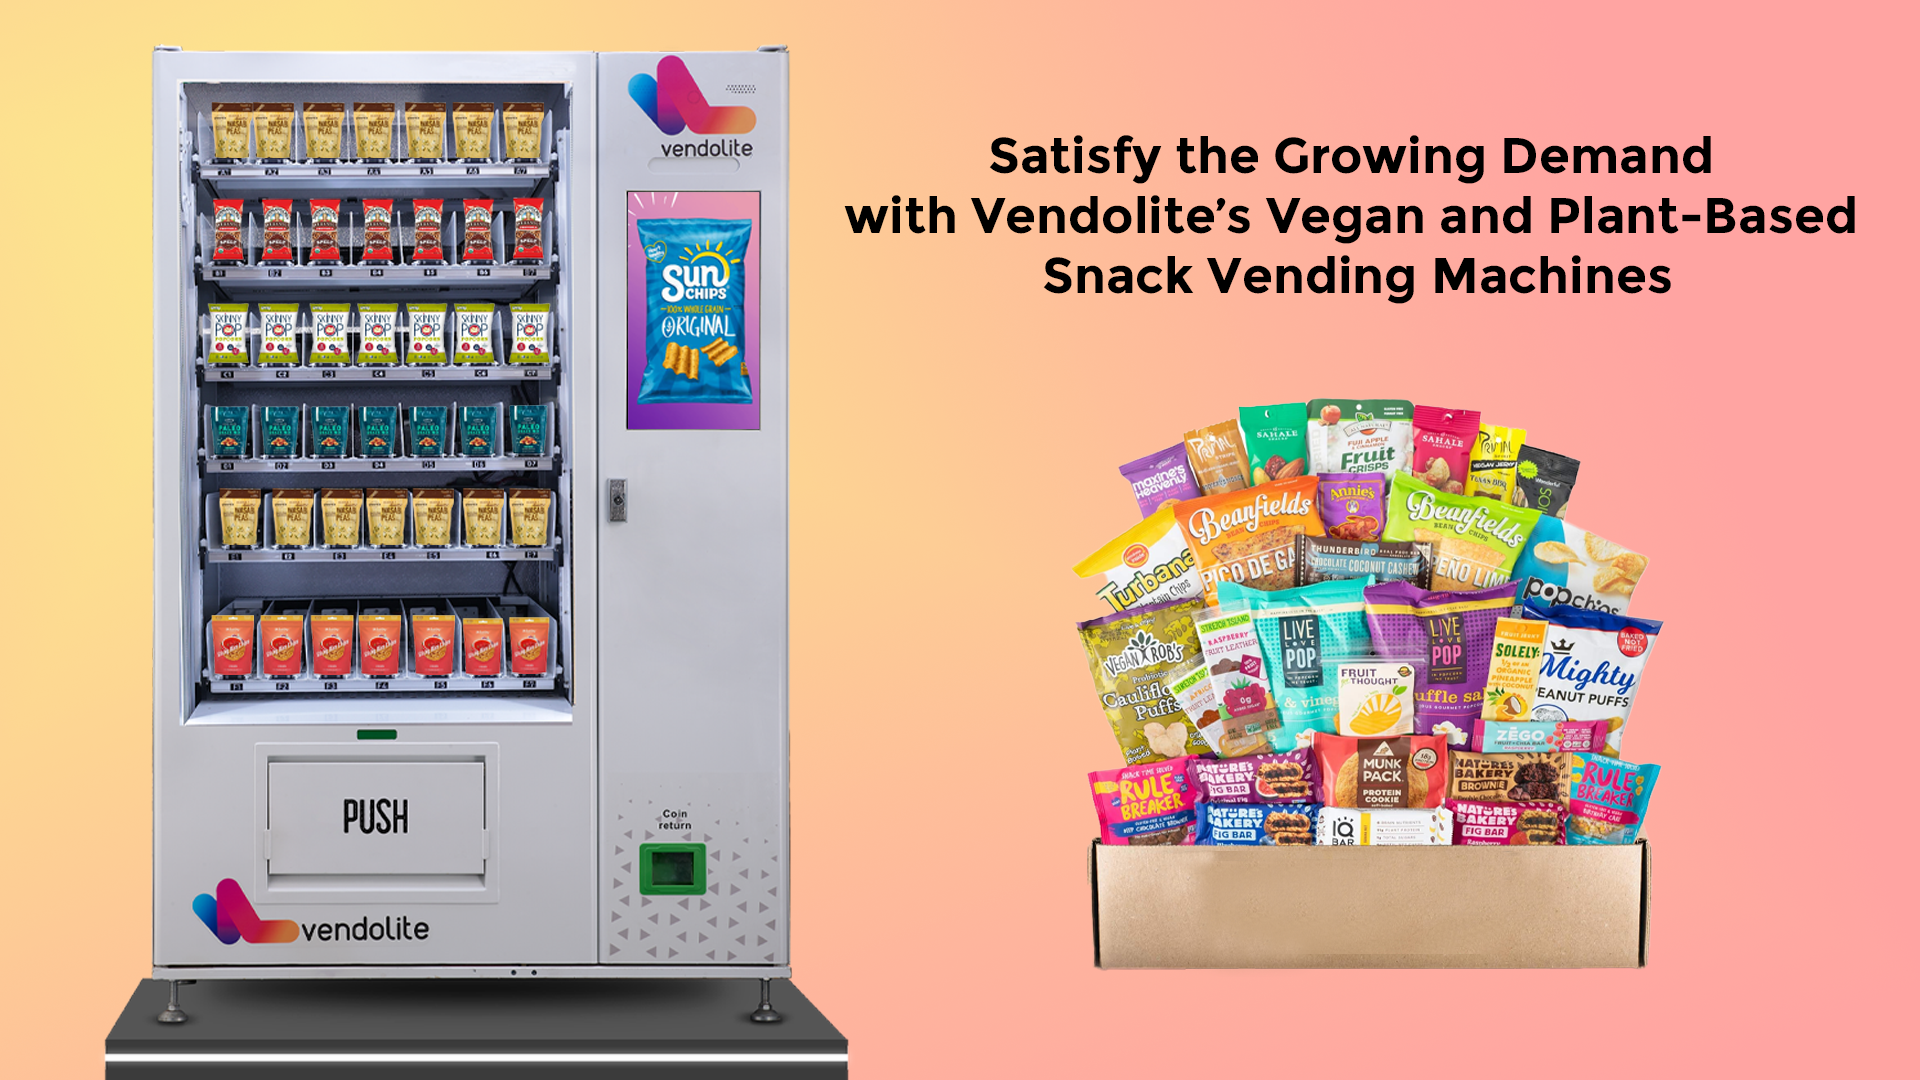 Satisfy the Growing Demand with Vendolite’s Vegan and Plant-Based Snack Vending Machines